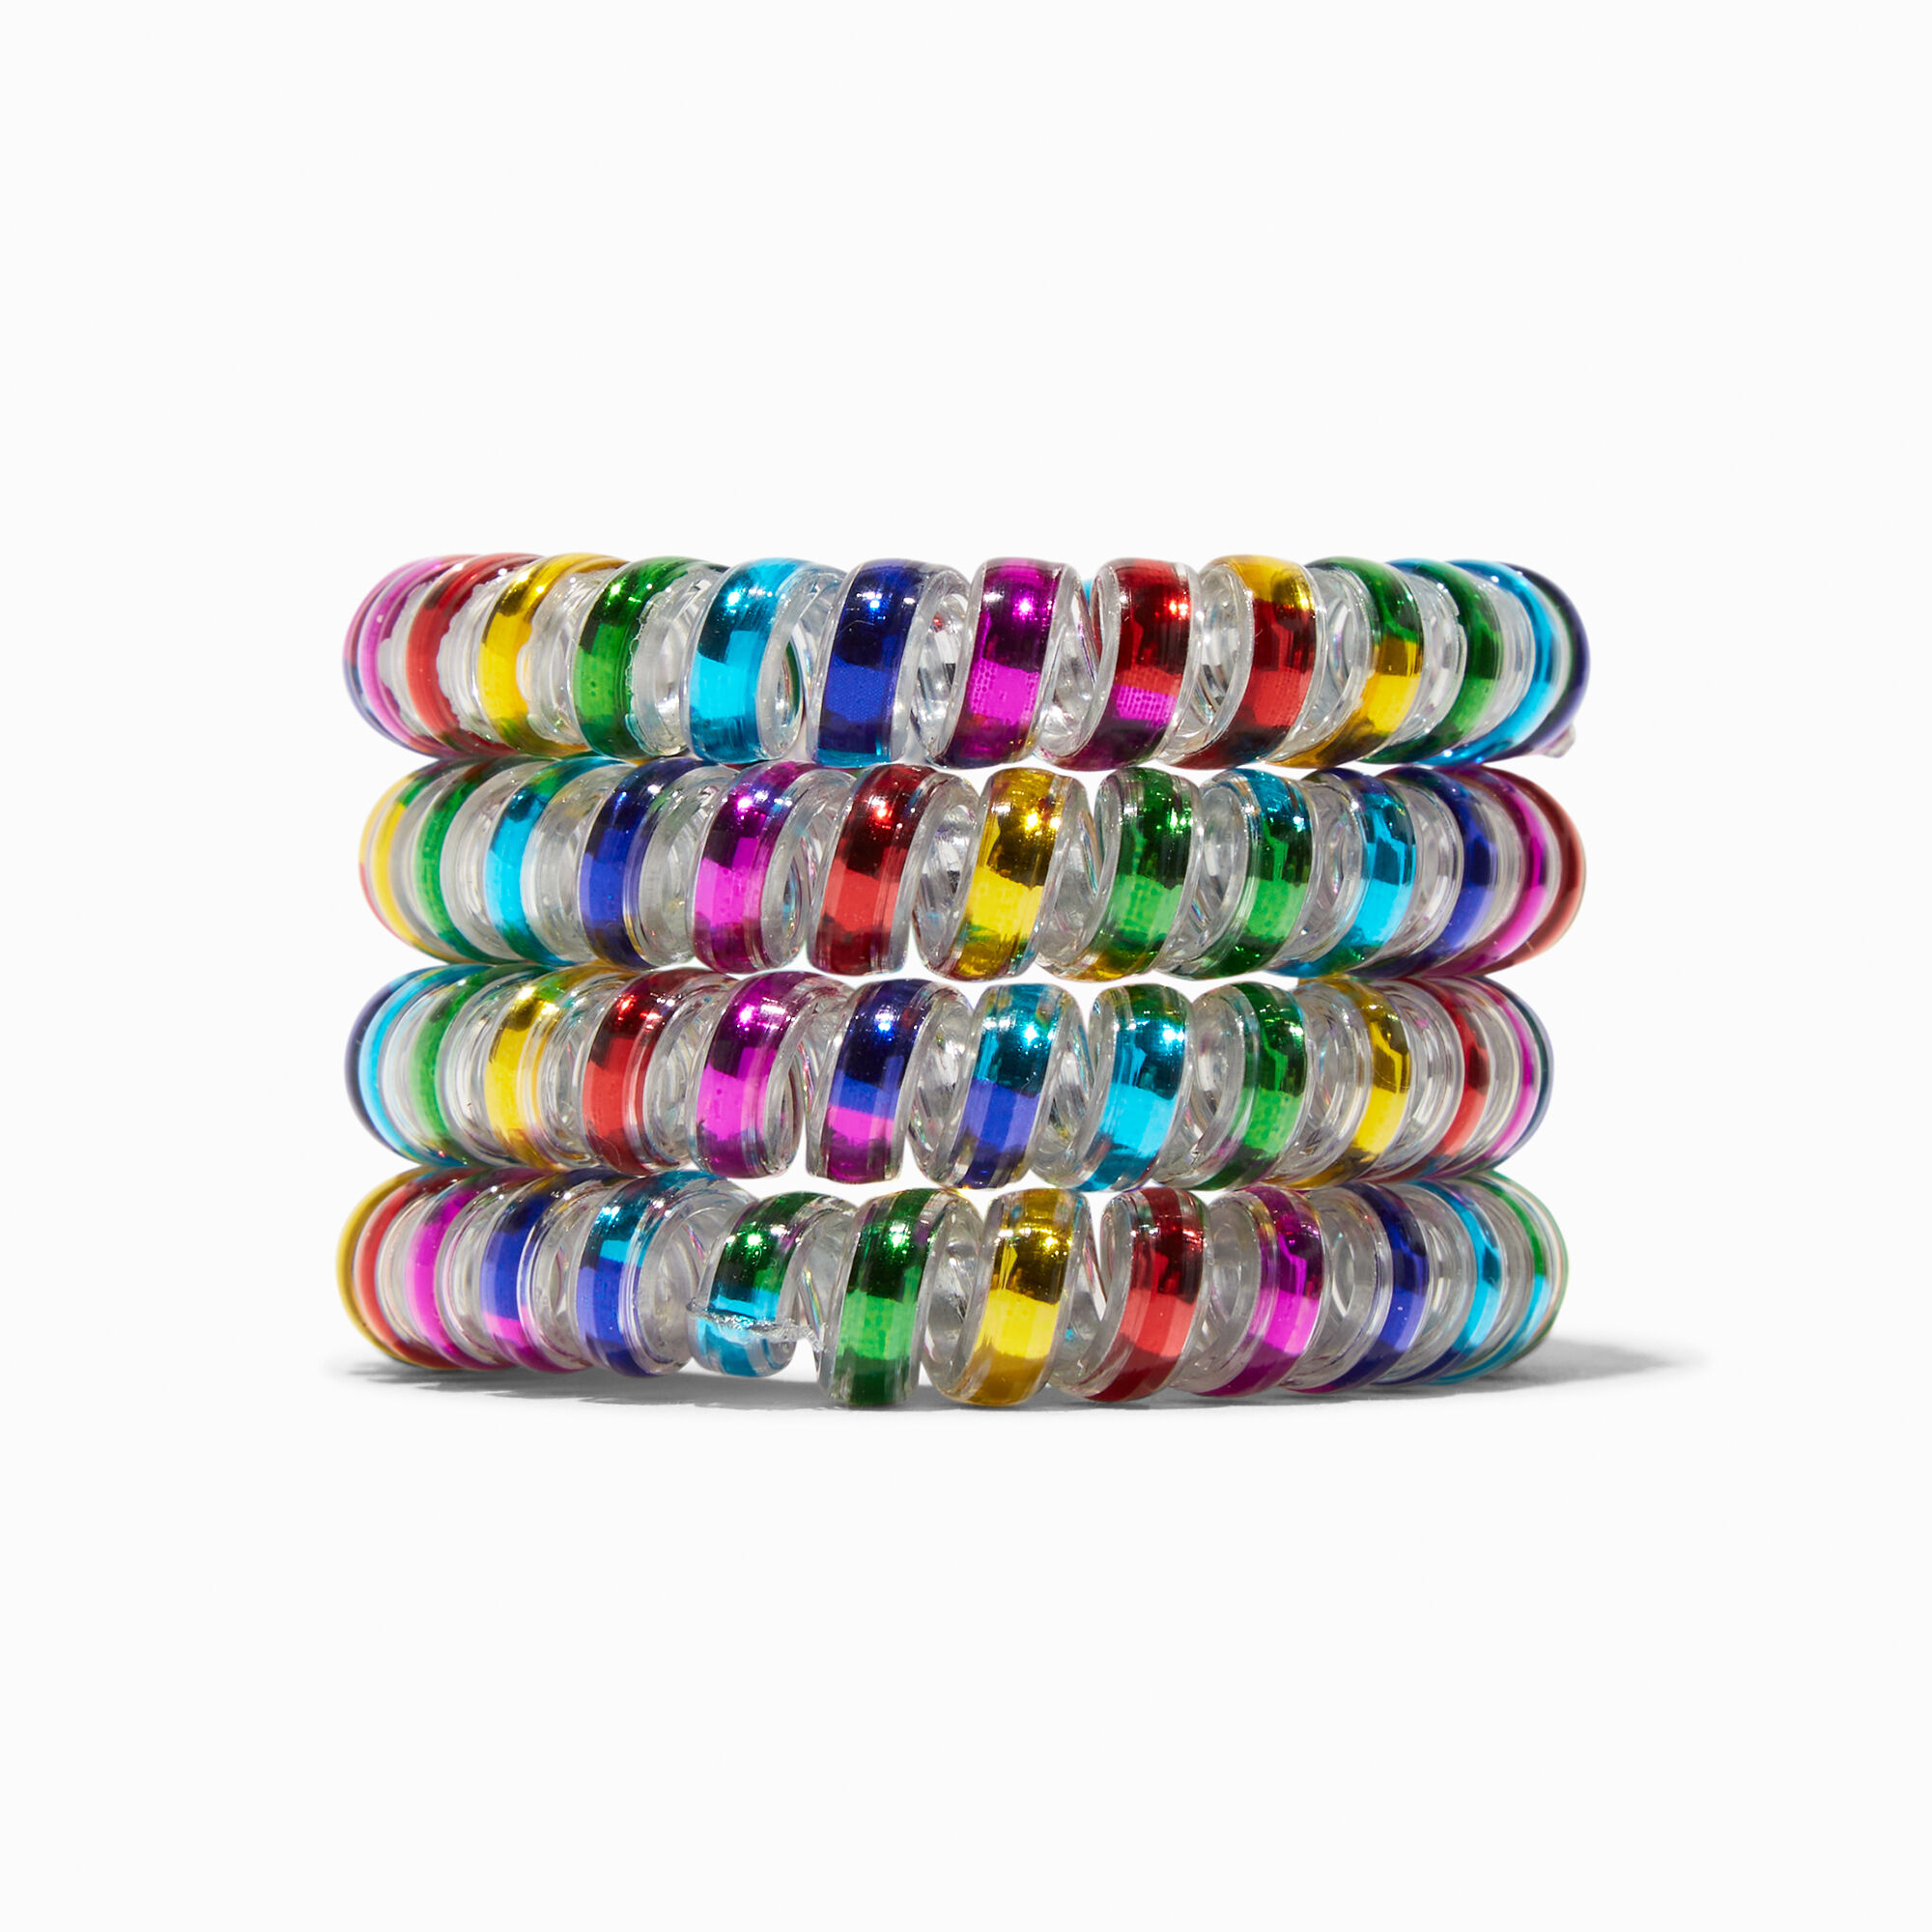 View Claires Iridescent Brights Spiral Hair Ties 4 Pack Bracelet information